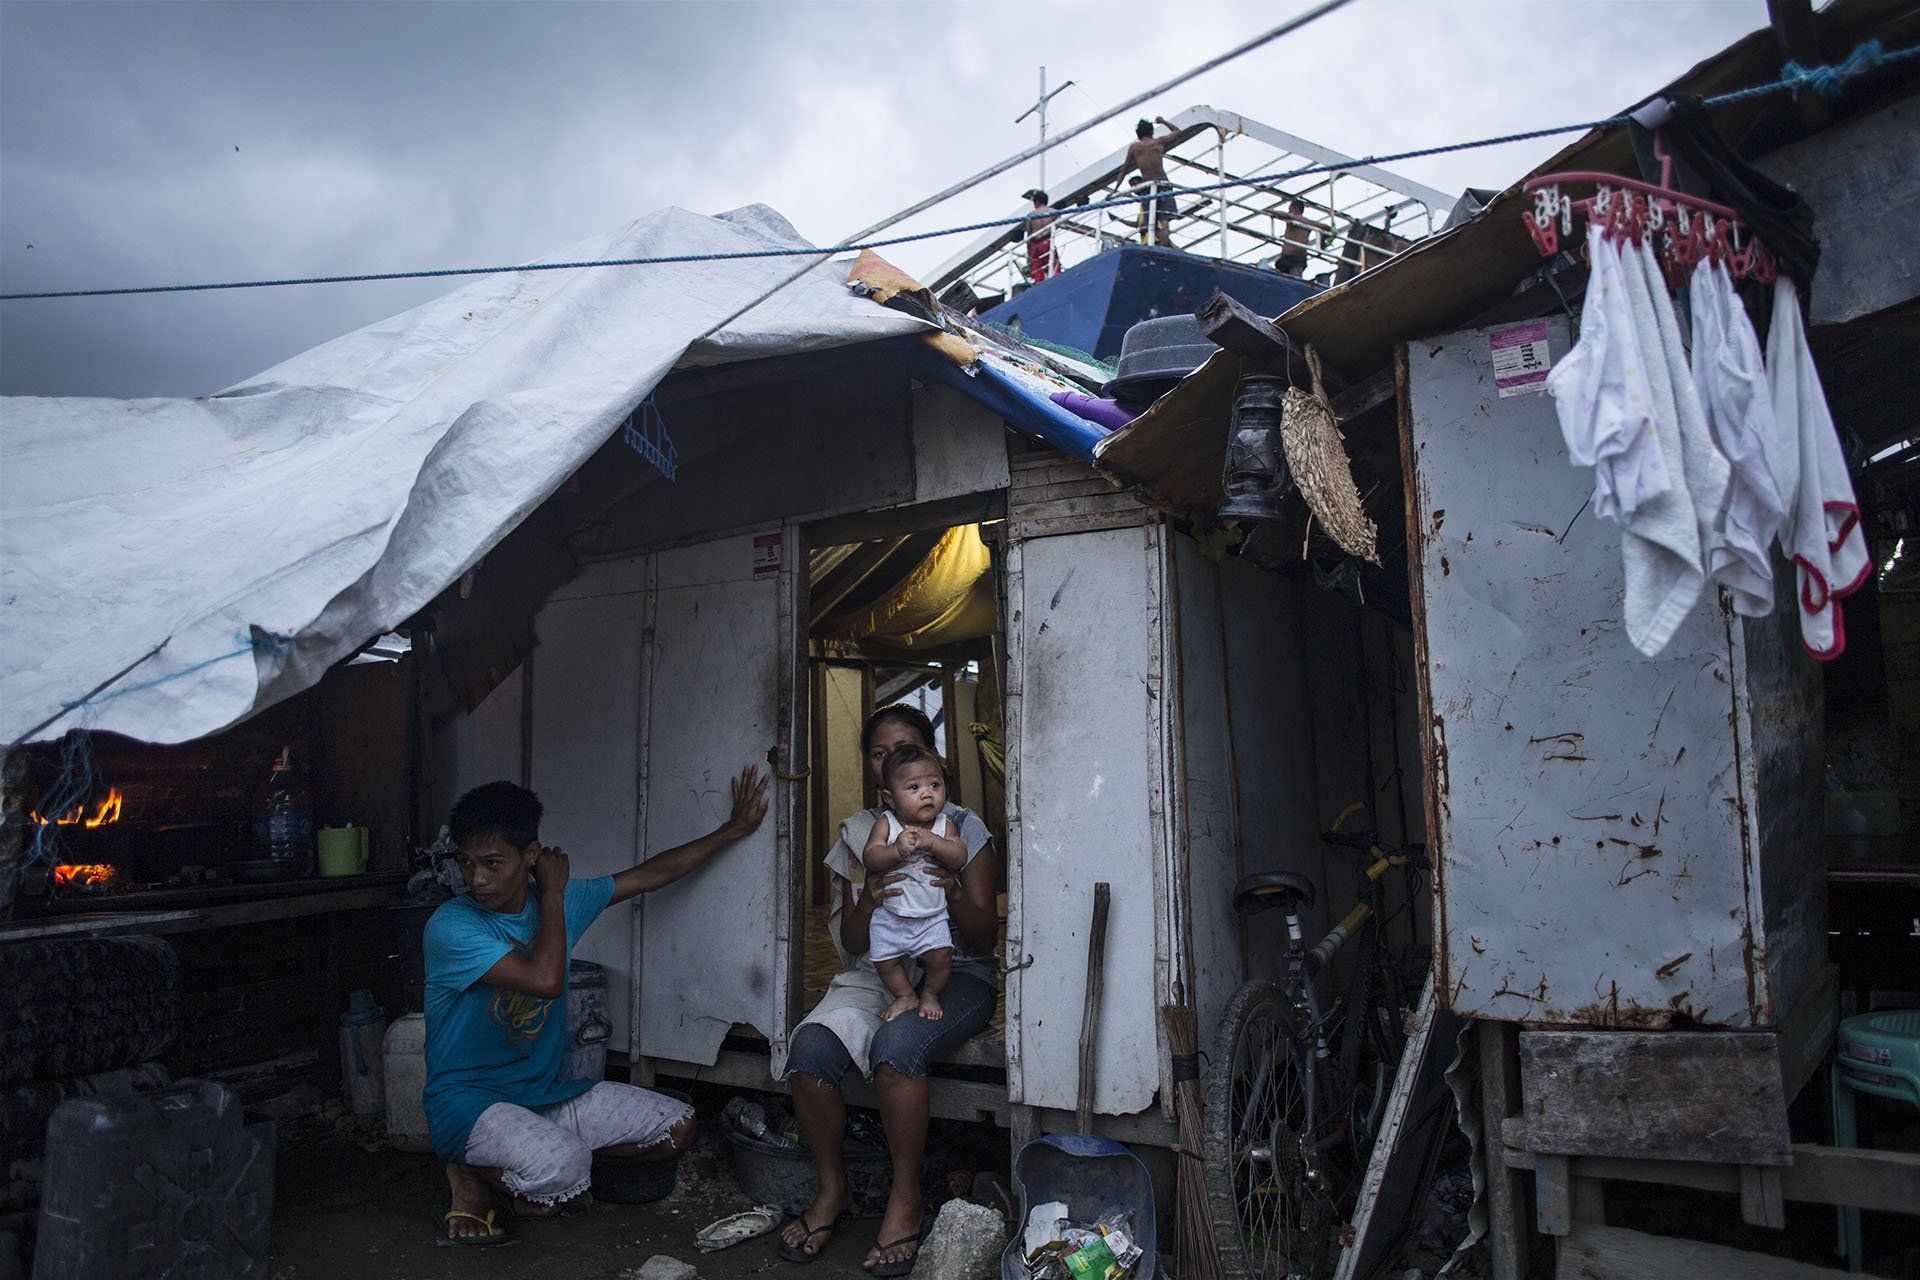 Eric and Roby Mameta by their house in Tacloban, in the Philippines, on Oct. 8, 2014, next to one of the ships that were washed ashore by supertyphoon Haiyan (Per Liljas)